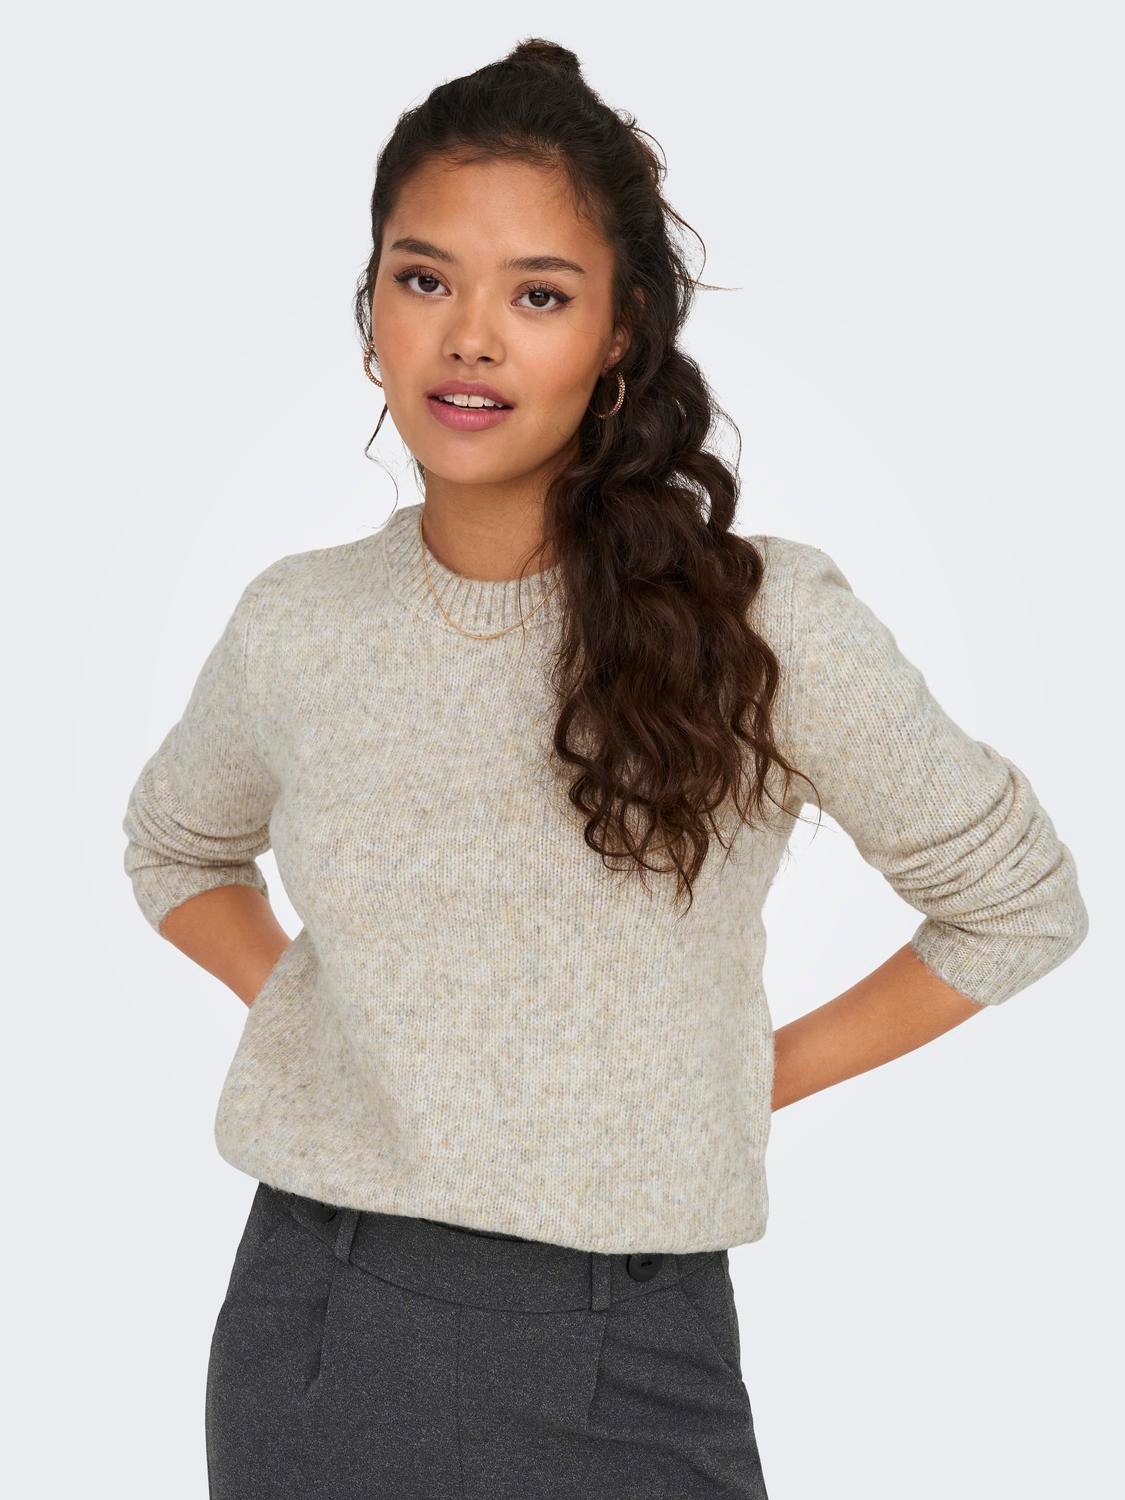 ONLY Knit Fit Round Neck Ribbed cuffs Pullover -Oatmeal - 15277866